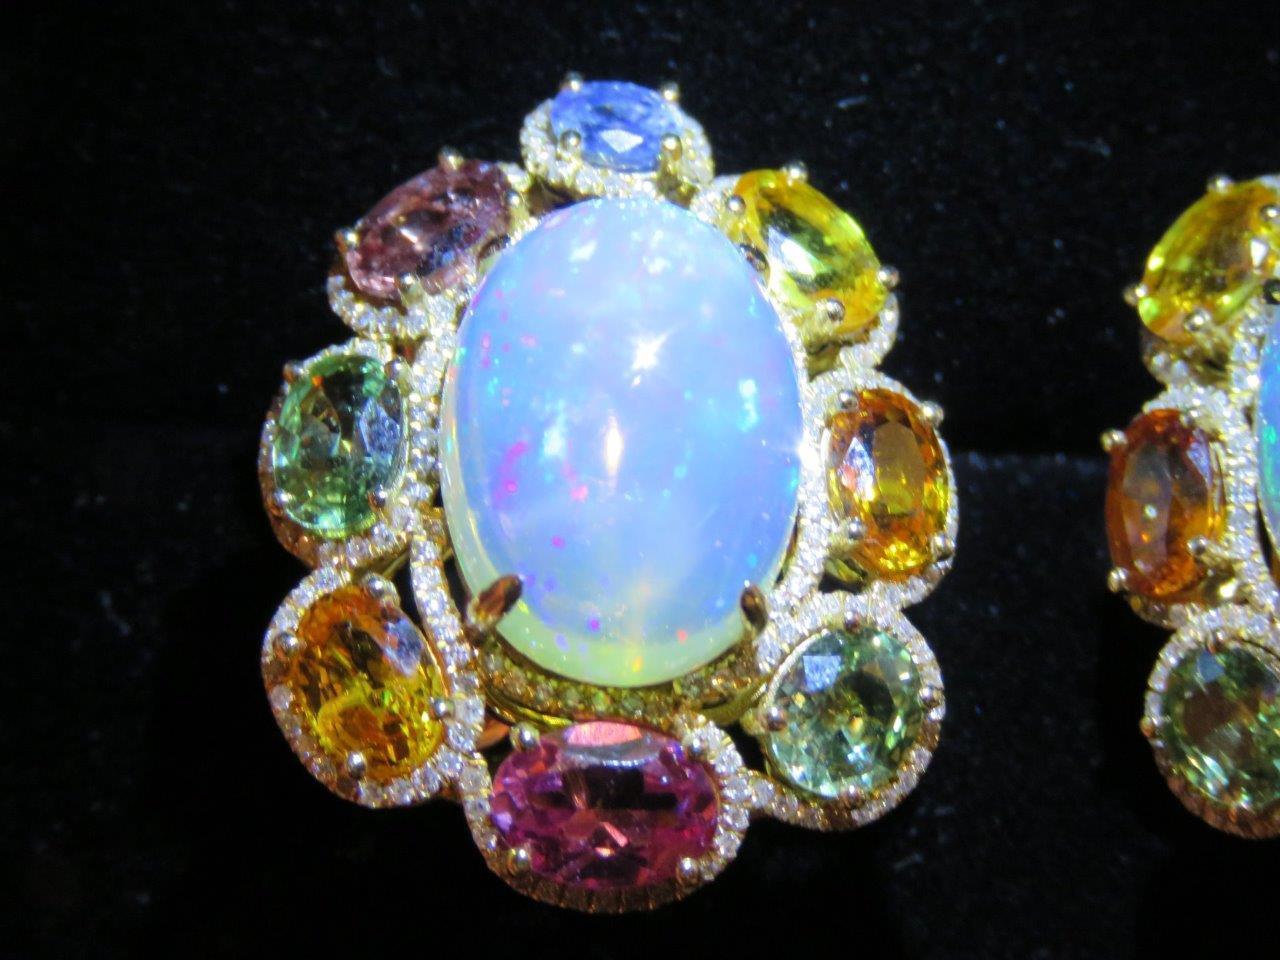 The Following Items we are offering is a Rare Important Radiant Pair of 18KT Gold Glistening Magnificent Large Fiery Opal Gorgeous Multi Rainbow Sapphire and Diamond Earrings. Stones are Very Clean and Extremely Fine! Approx T.C.W for Earrings:

2